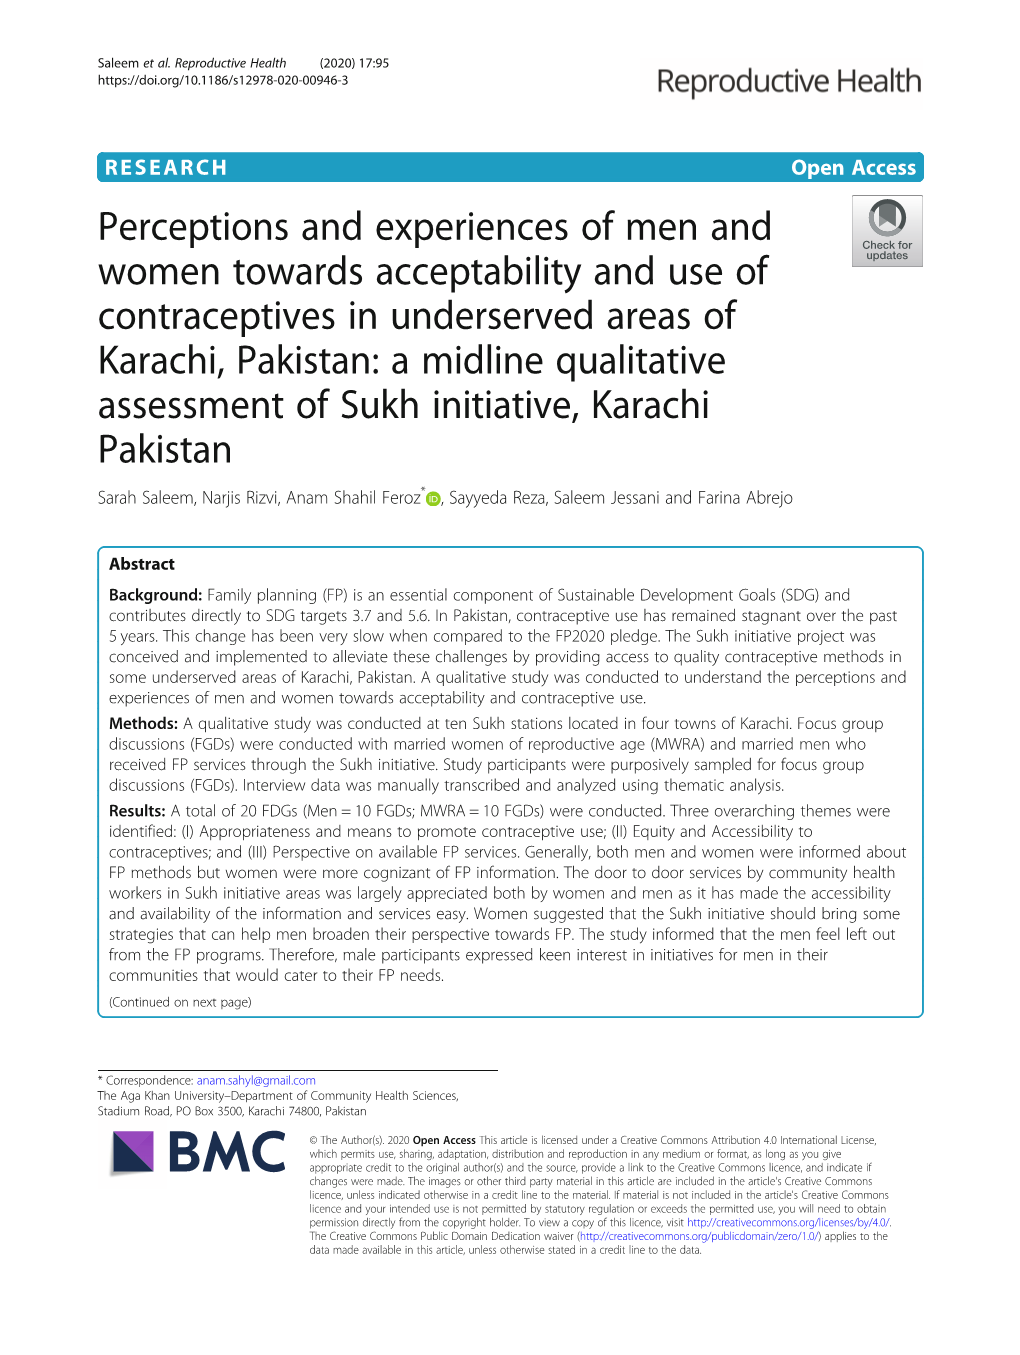 Perceptions and Experiences of Men and Women Towards Acceptability and Use of Contraceptives in Underserved Areas of Karachi, Pa